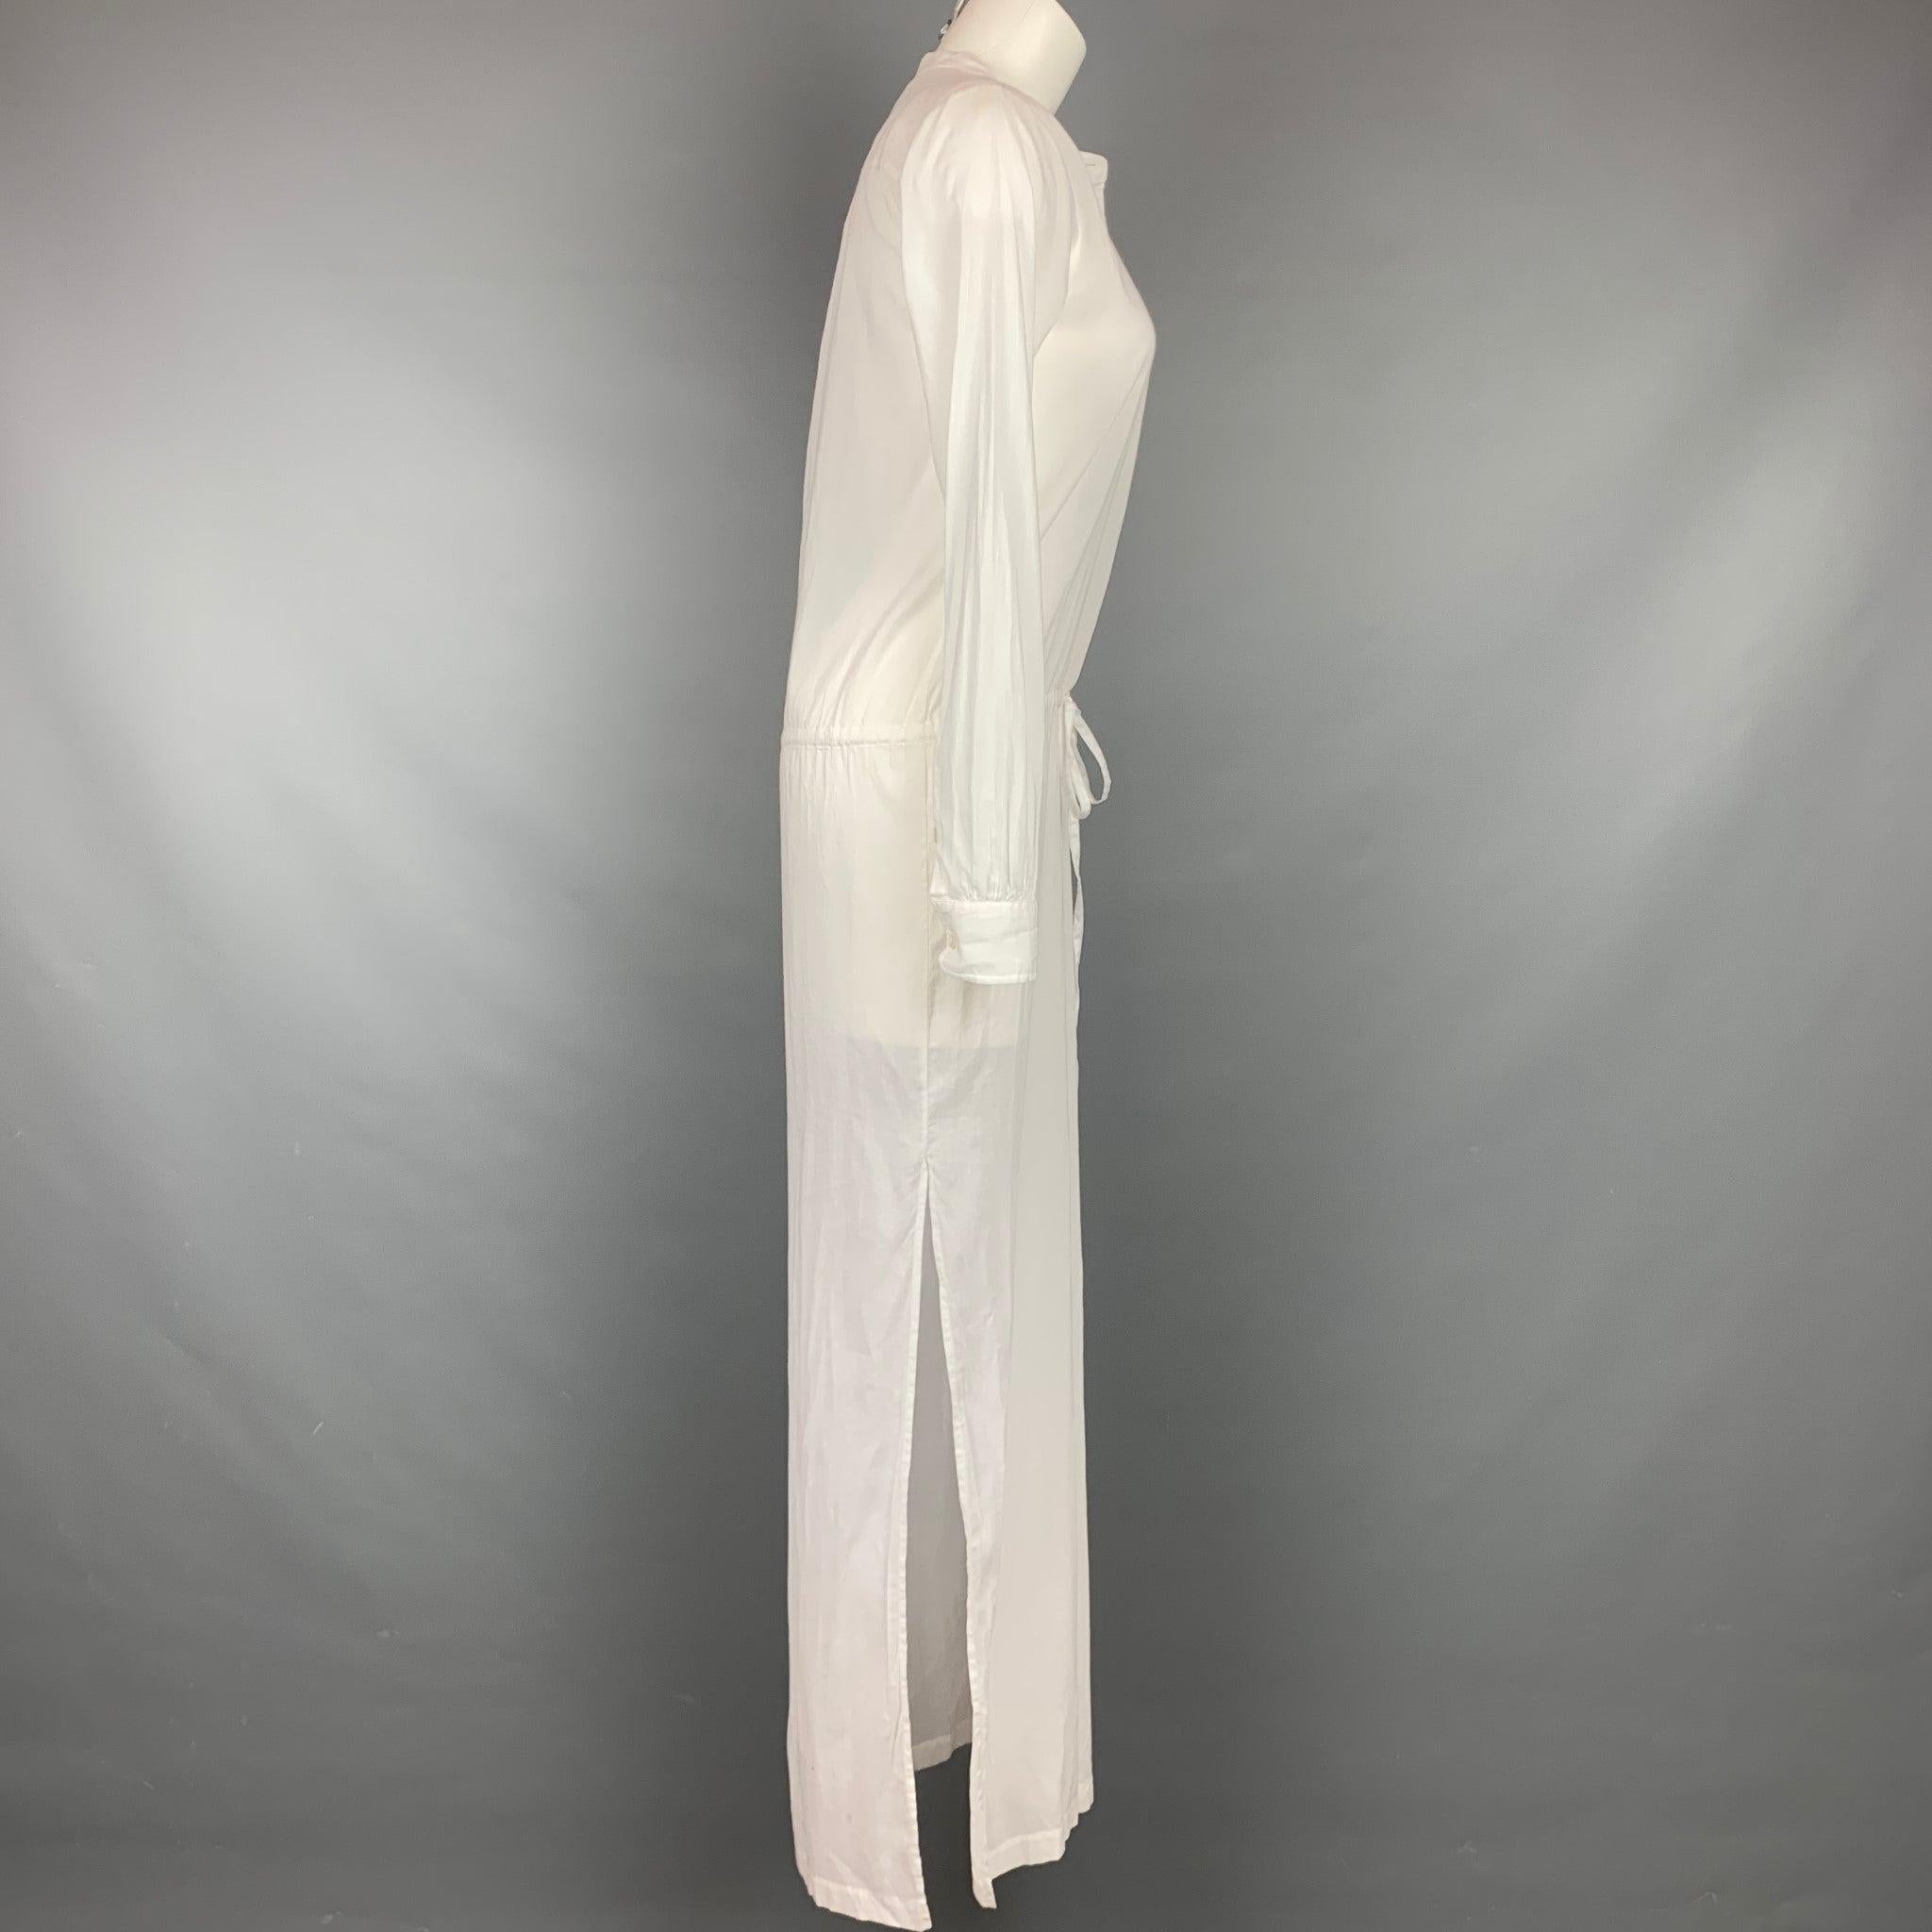 THEORY dress comes in a white cotton featuring a nehru collar, drawstring, front pocket, slits, and a buttoned closure. Comes with tags.Good
Pre-Owned Condition. Light discoloration at front & back. 

Marked:   P/TP 

Measurements: 
 
Shoulder: 14.5